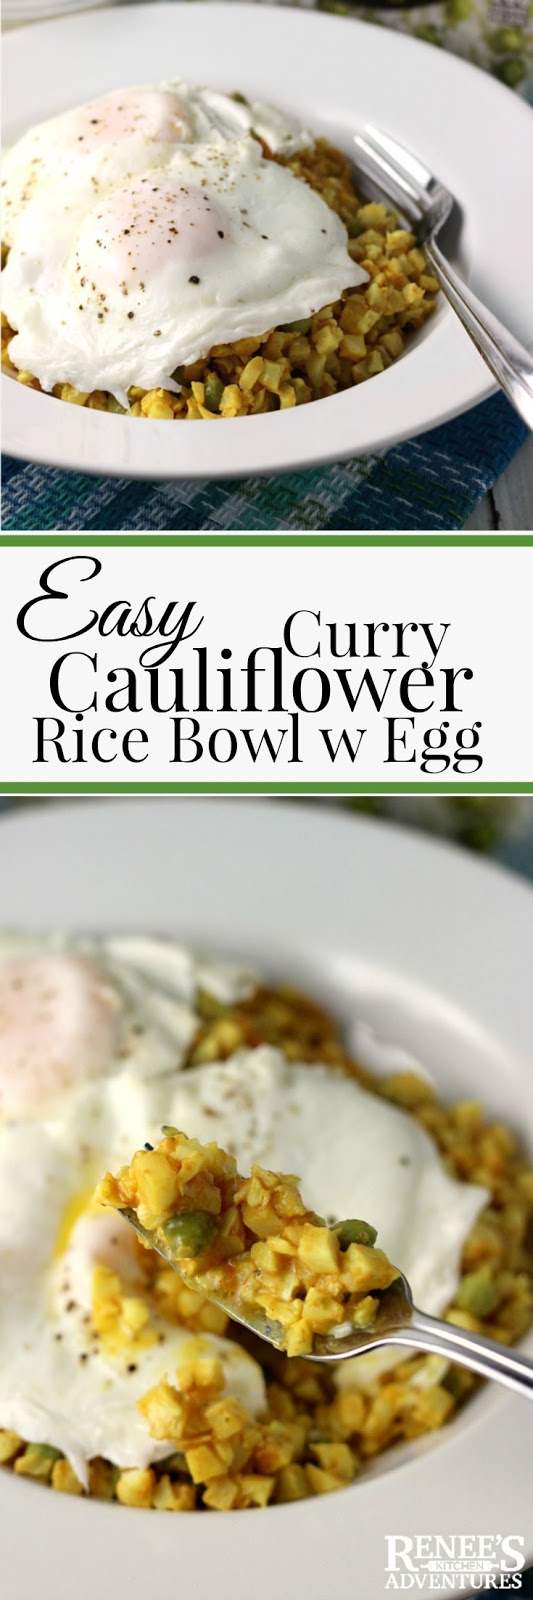 Easy Curry Cauliflower Rice Bowl with Egg | Renee's Kitchen Adventures